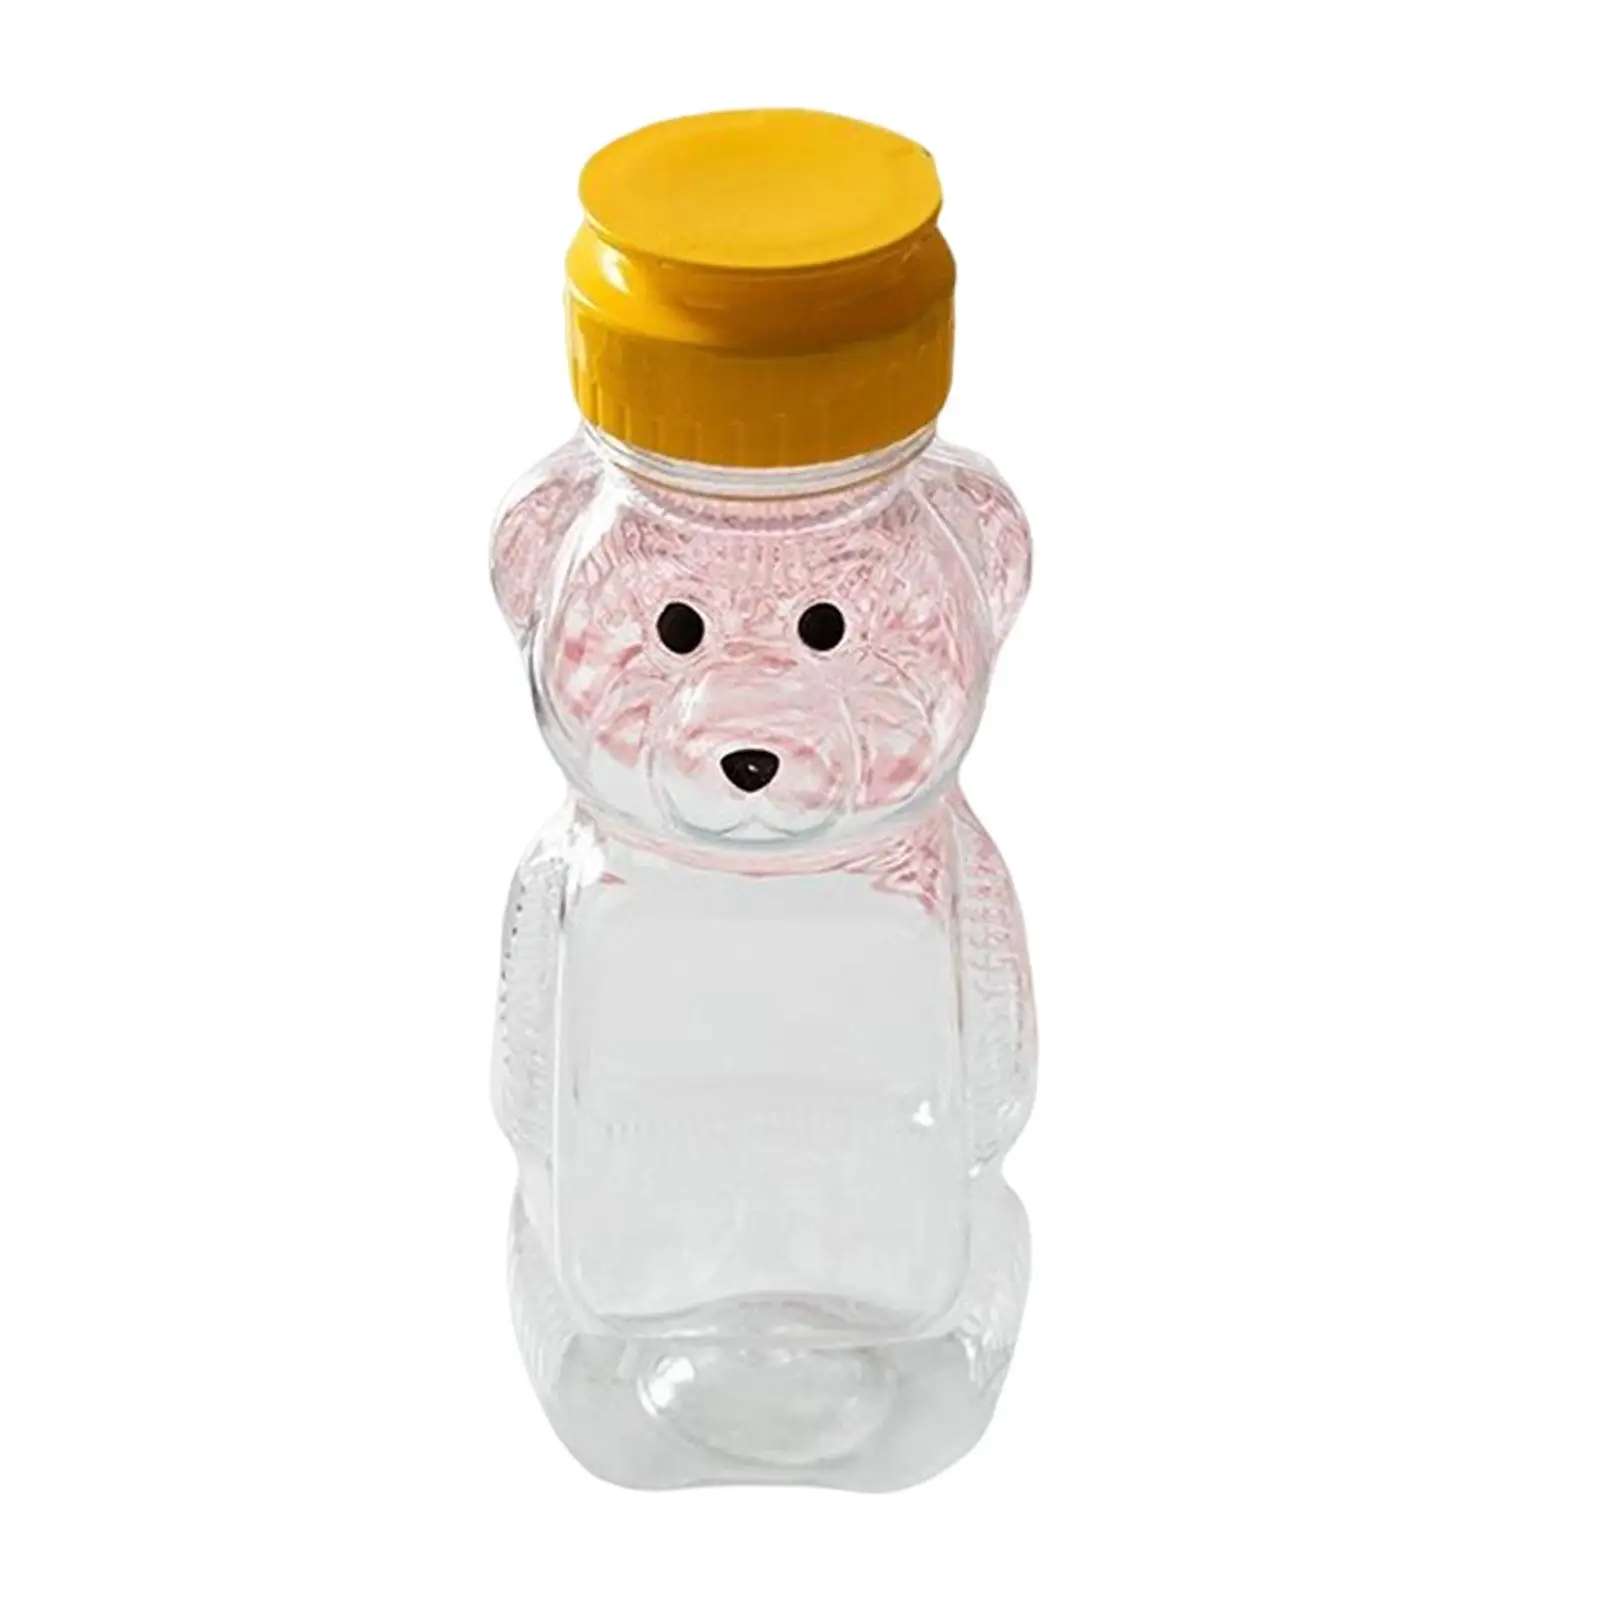 Drinking Bottle Honey Jar Decoration Condiment Cups for Juice Ketchup Oil